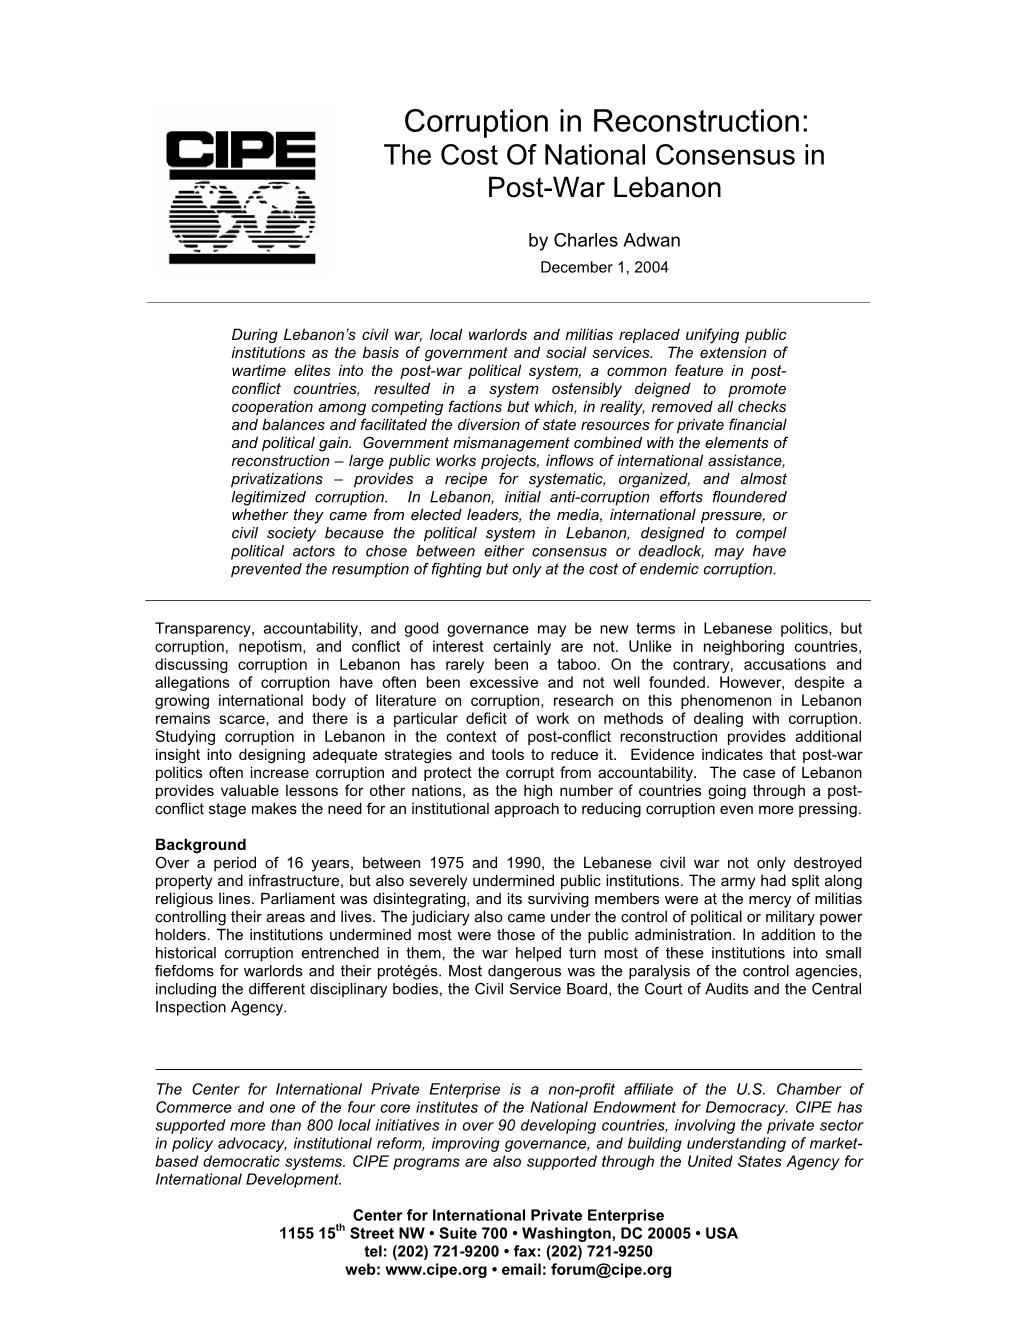 Corruption in Reconstruction: the Cost of National Consensus in Post-War Lebanon